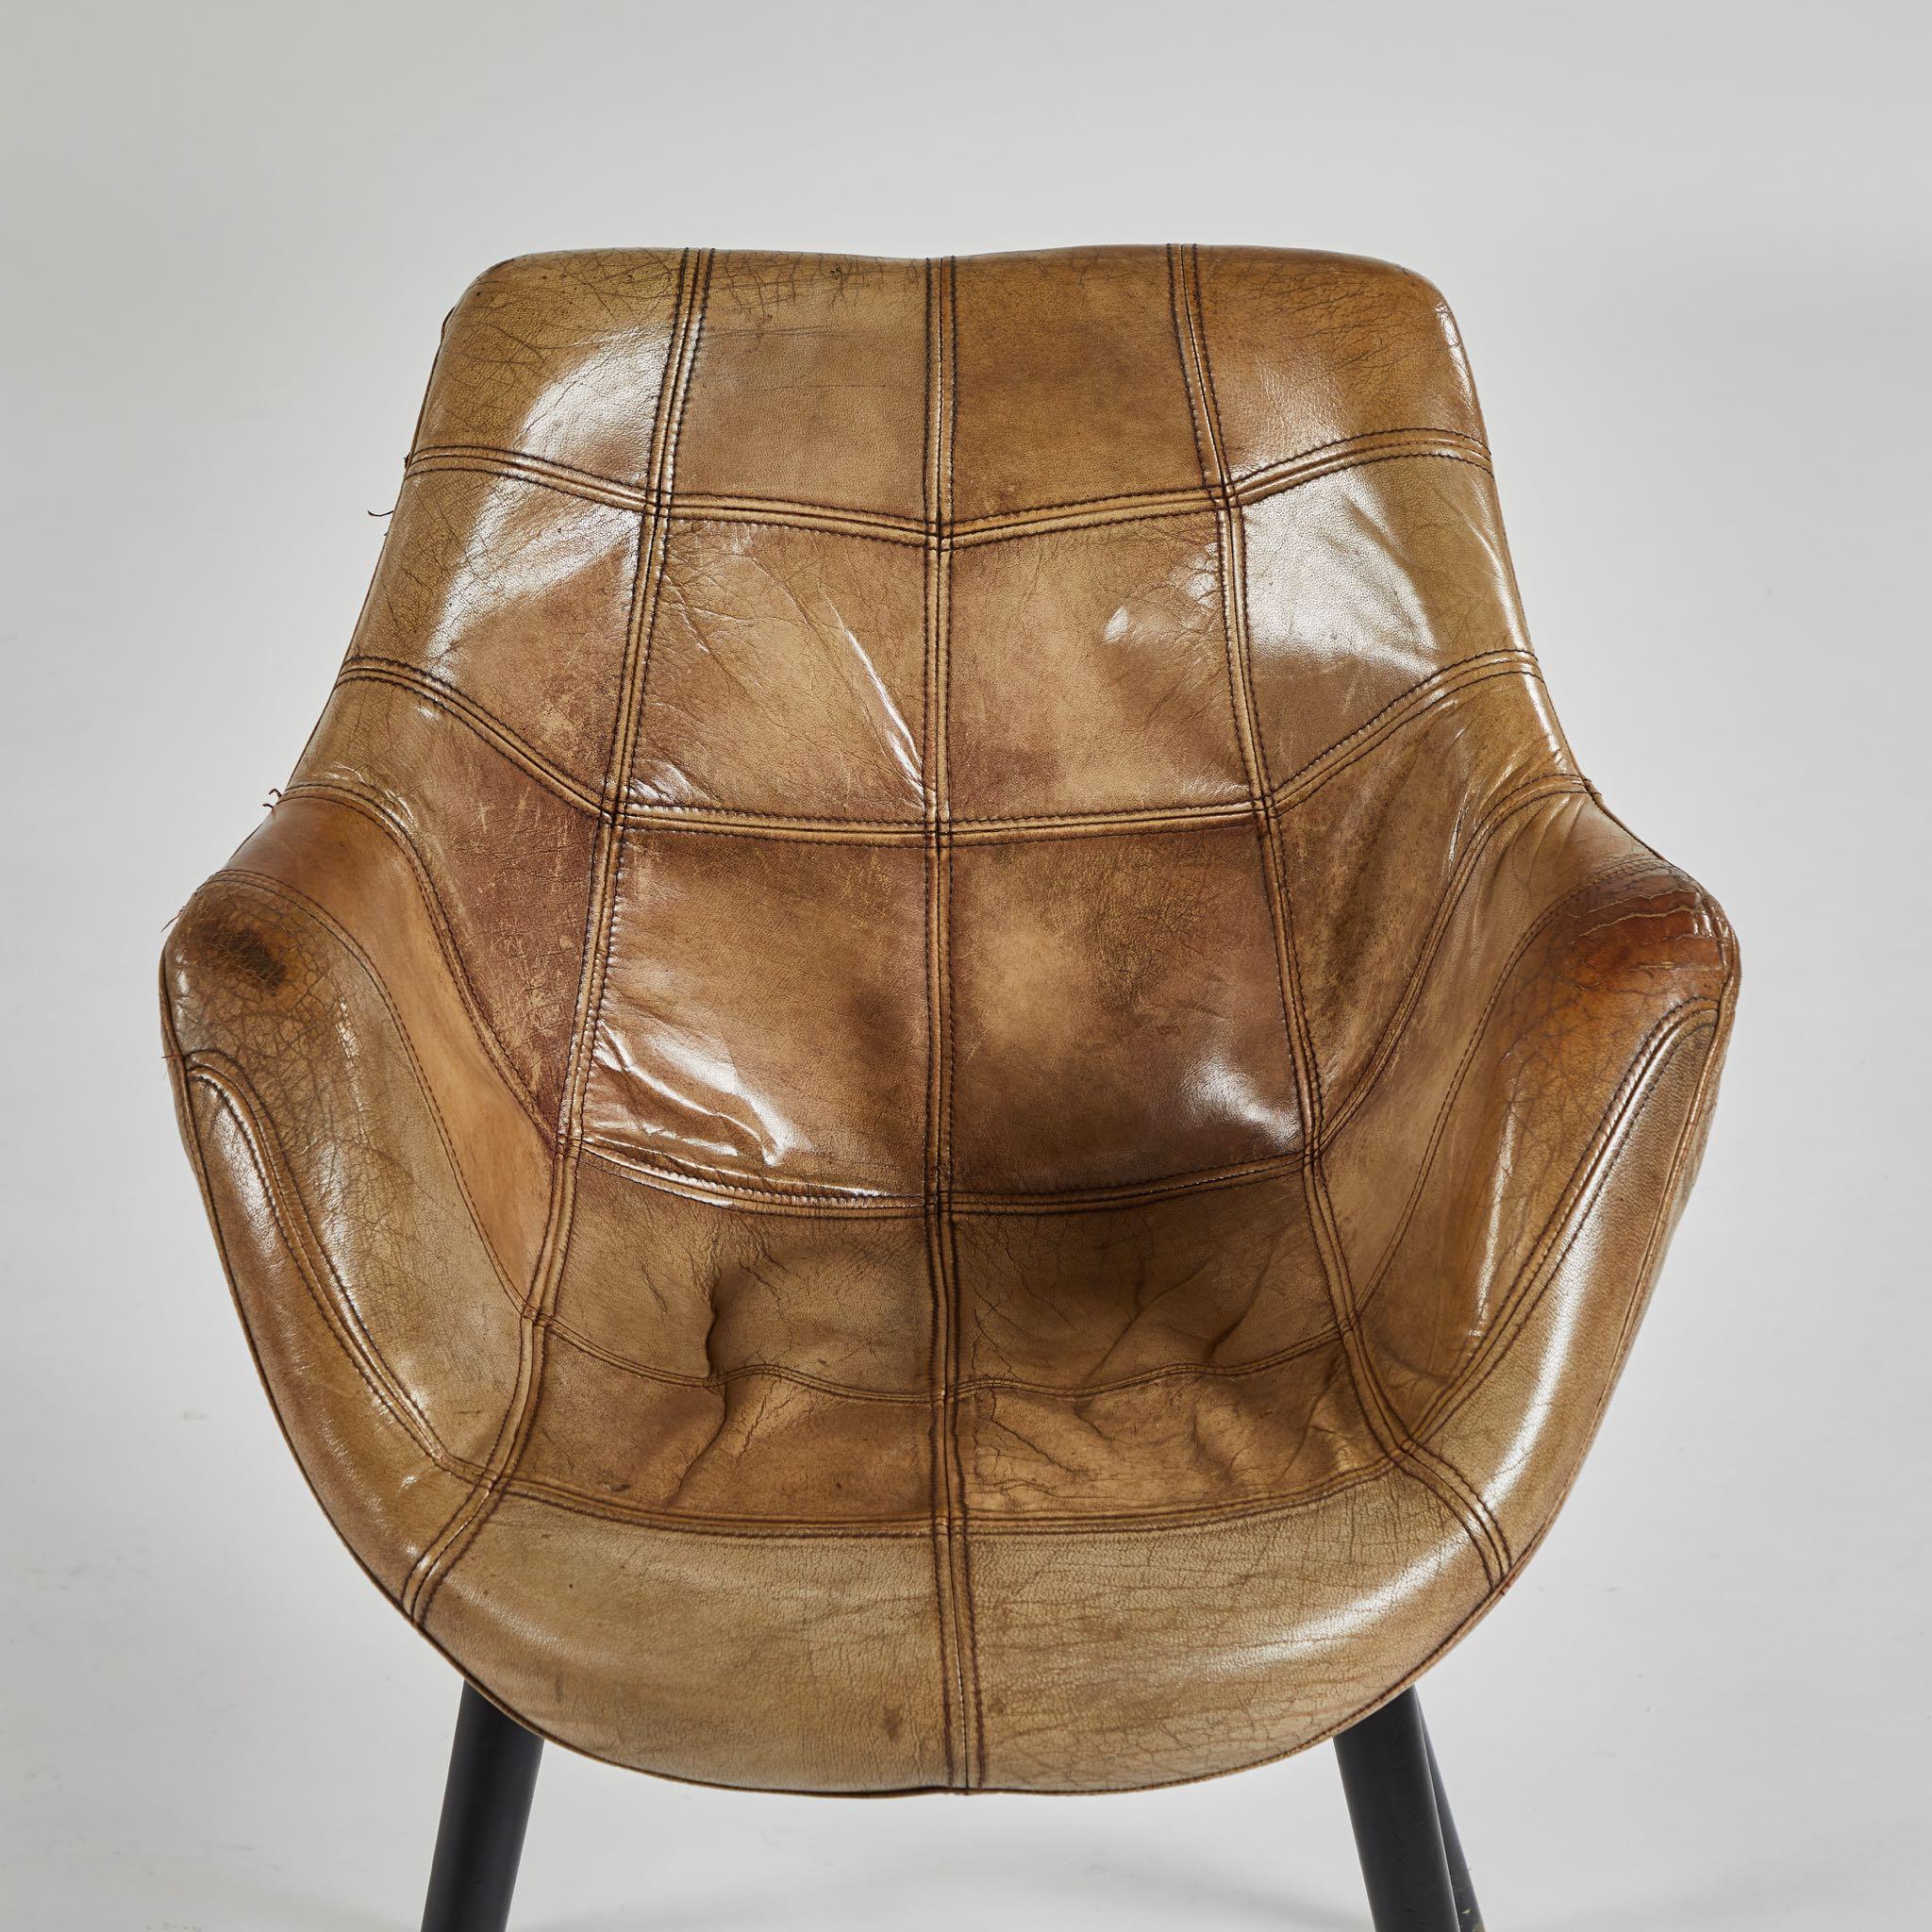 A pair of leather upholstered armchairs with seat, originating in France, circa 1969.